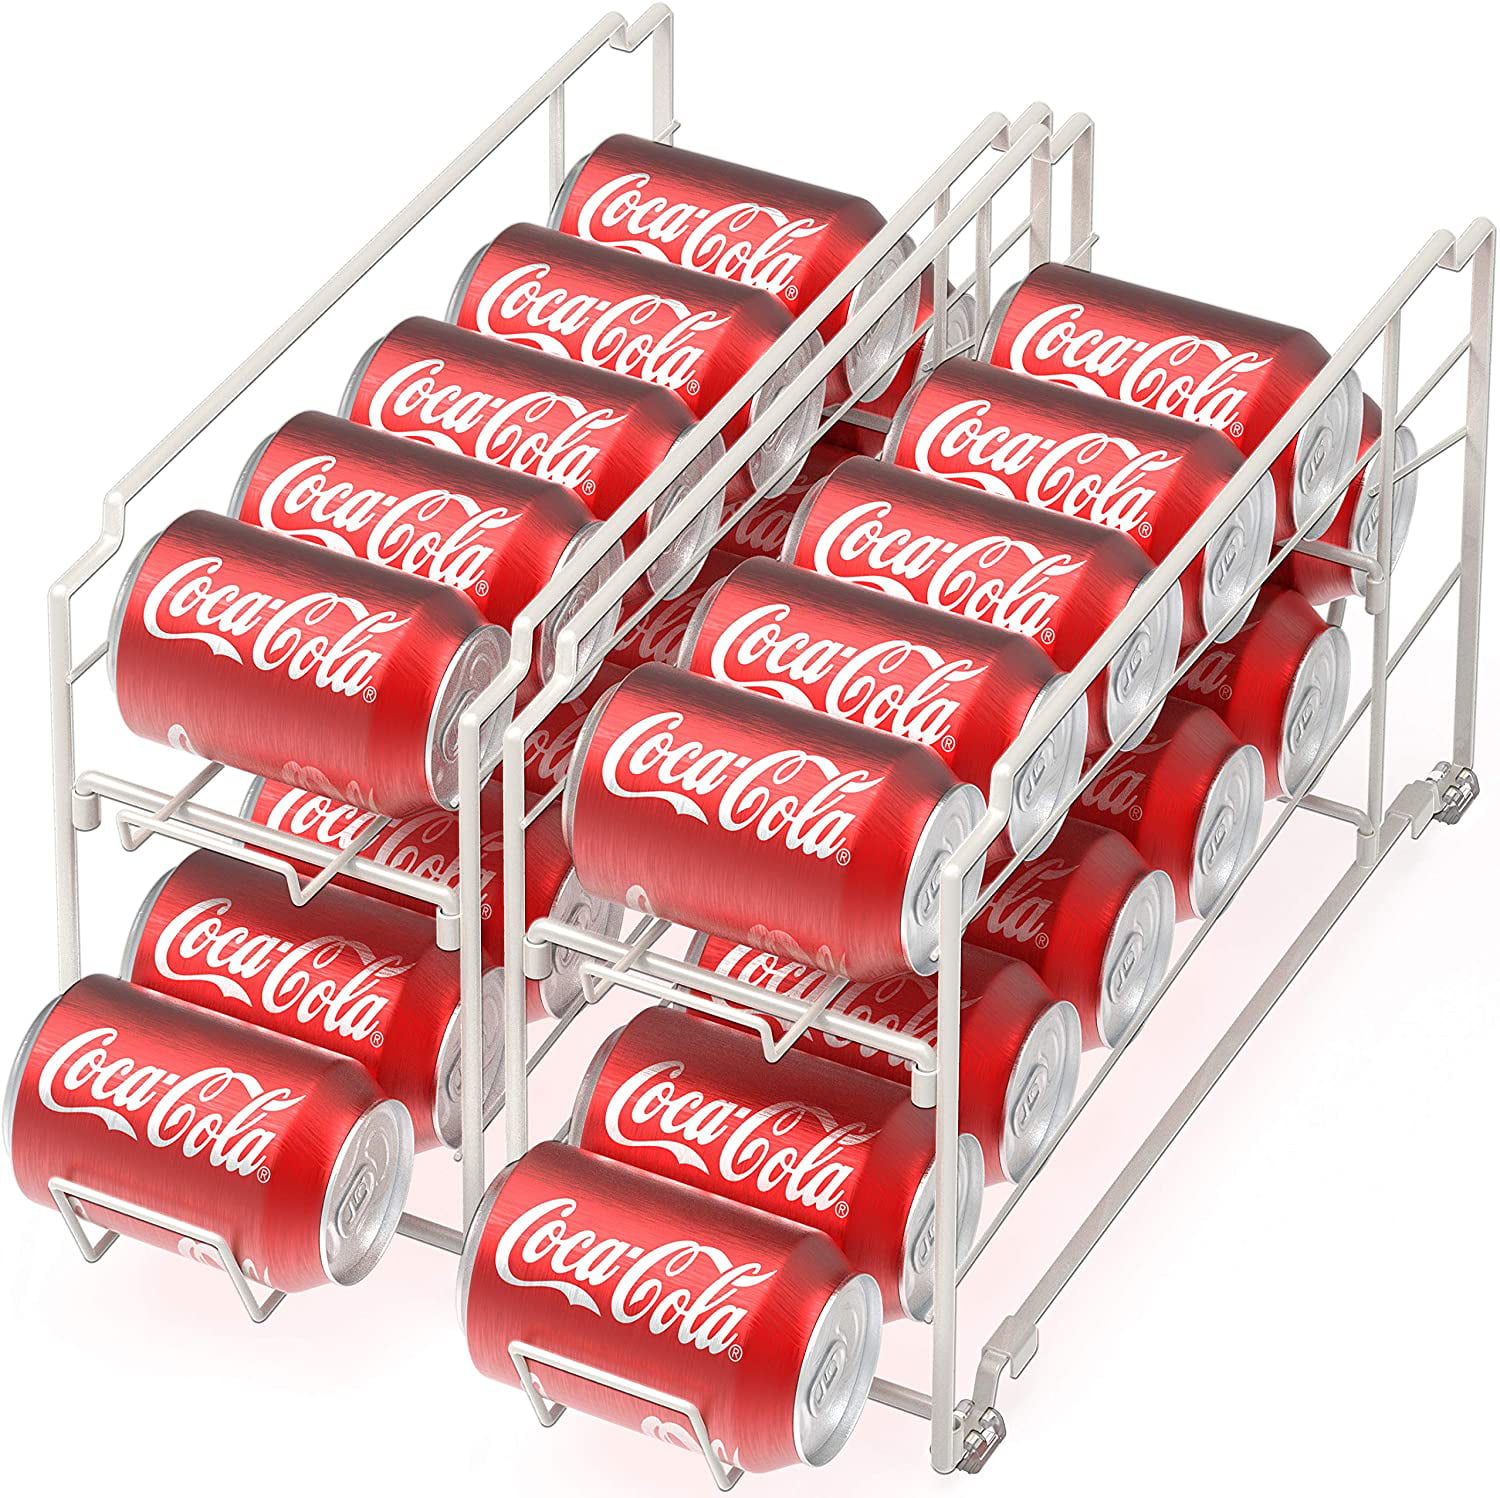 Black 4 Pack Front Loading Soda Can Storage Organizer Holder for 12 Cans Each 